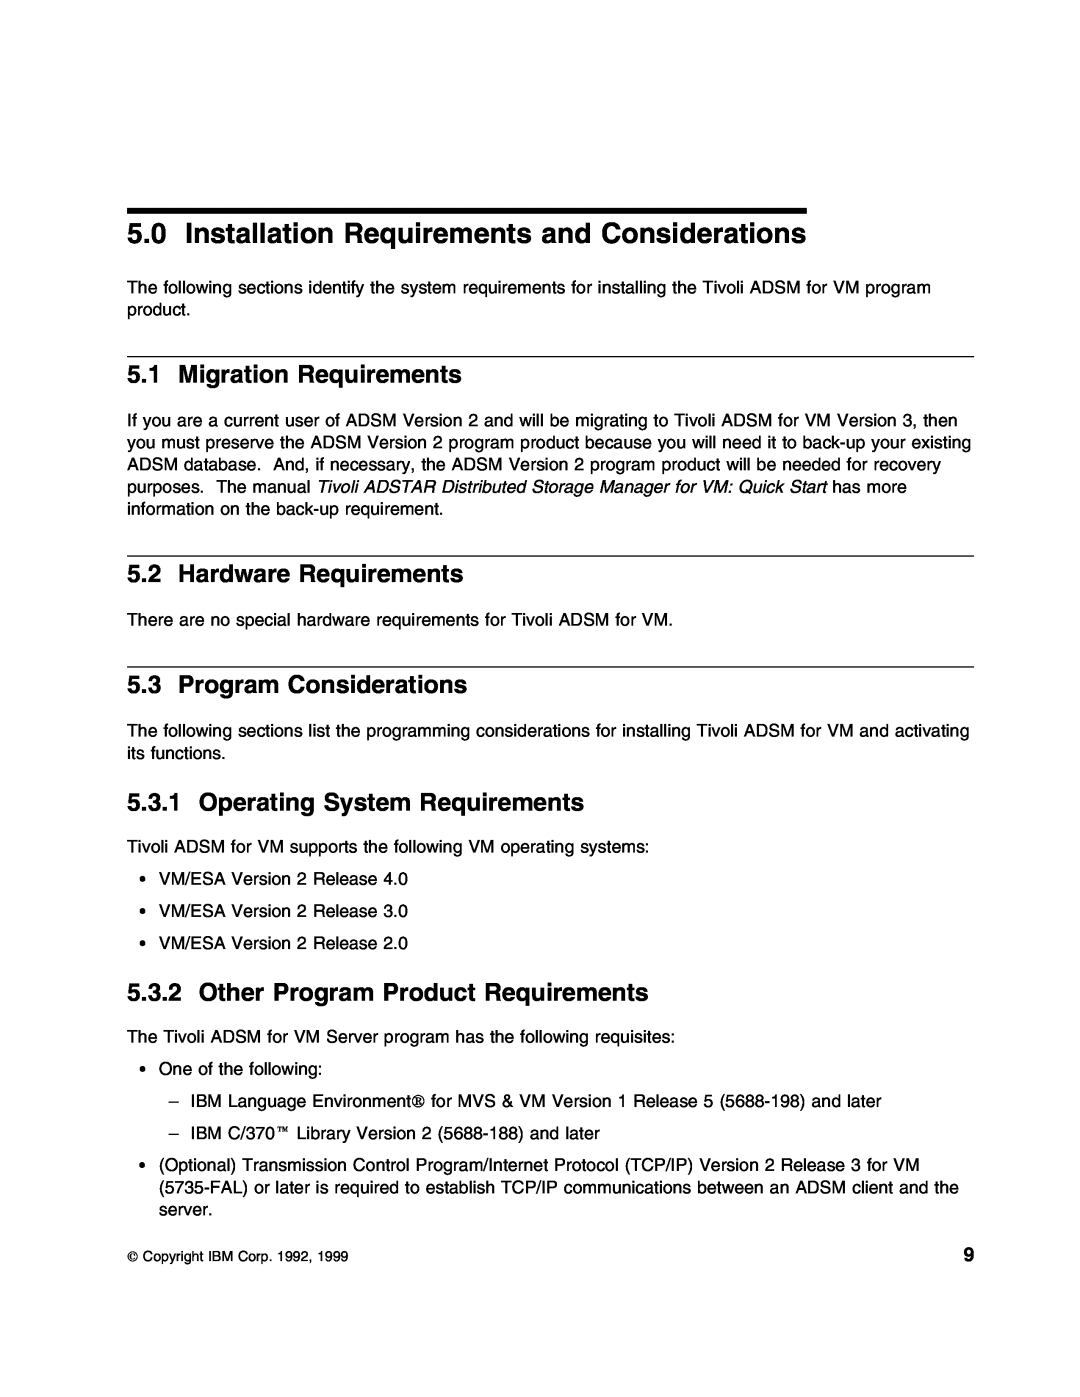 IBM 5697-VM3 manual Installation Requirements and Considerations, Migration Requirements, Hardware Requirements 